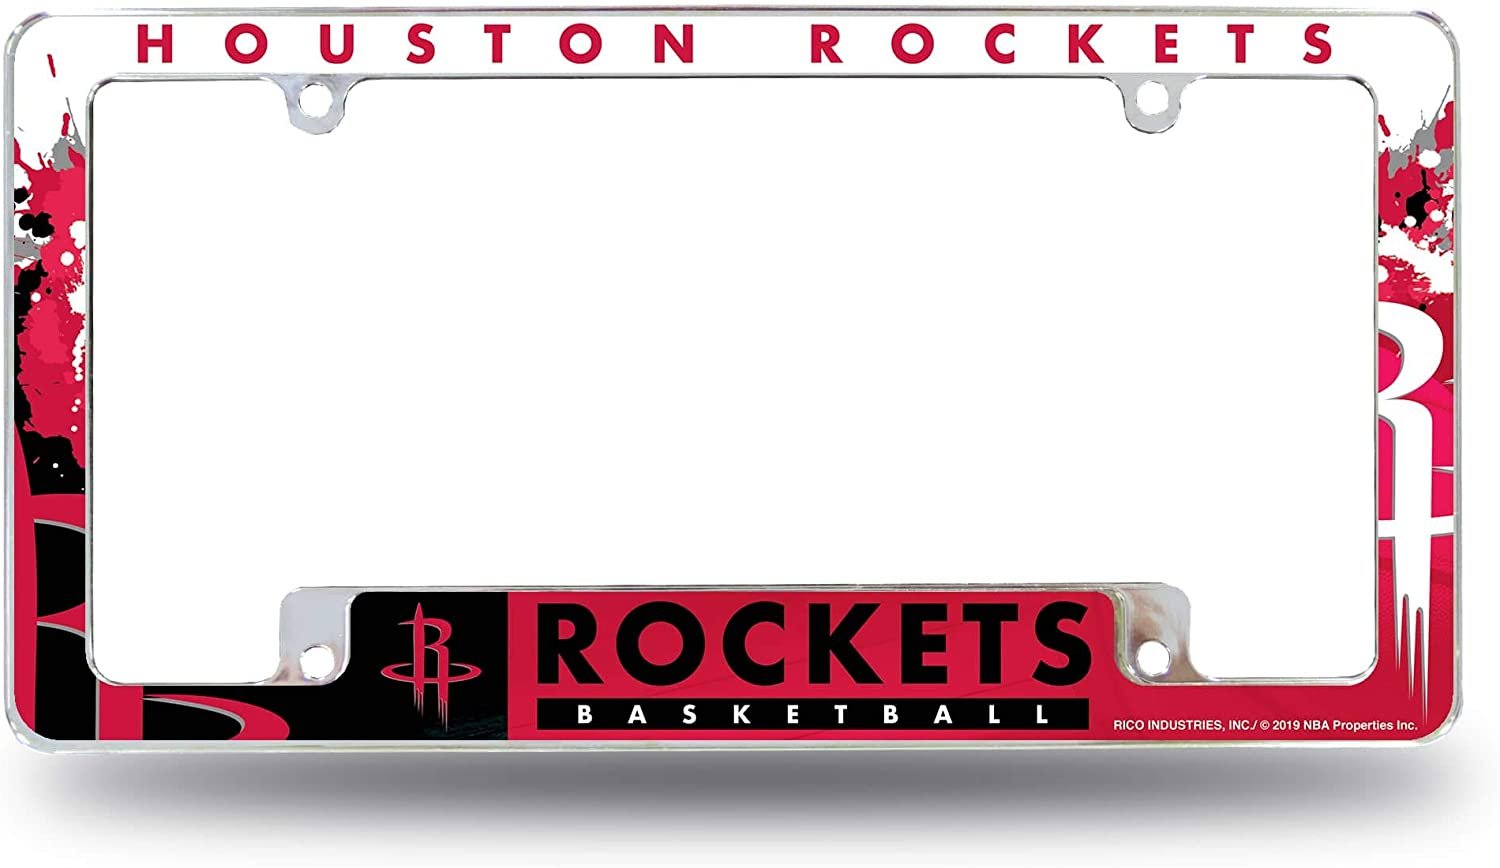 Houston Rockets Metal License License Plate Frame Tag Cover, All Over Design, 12x6 Inch